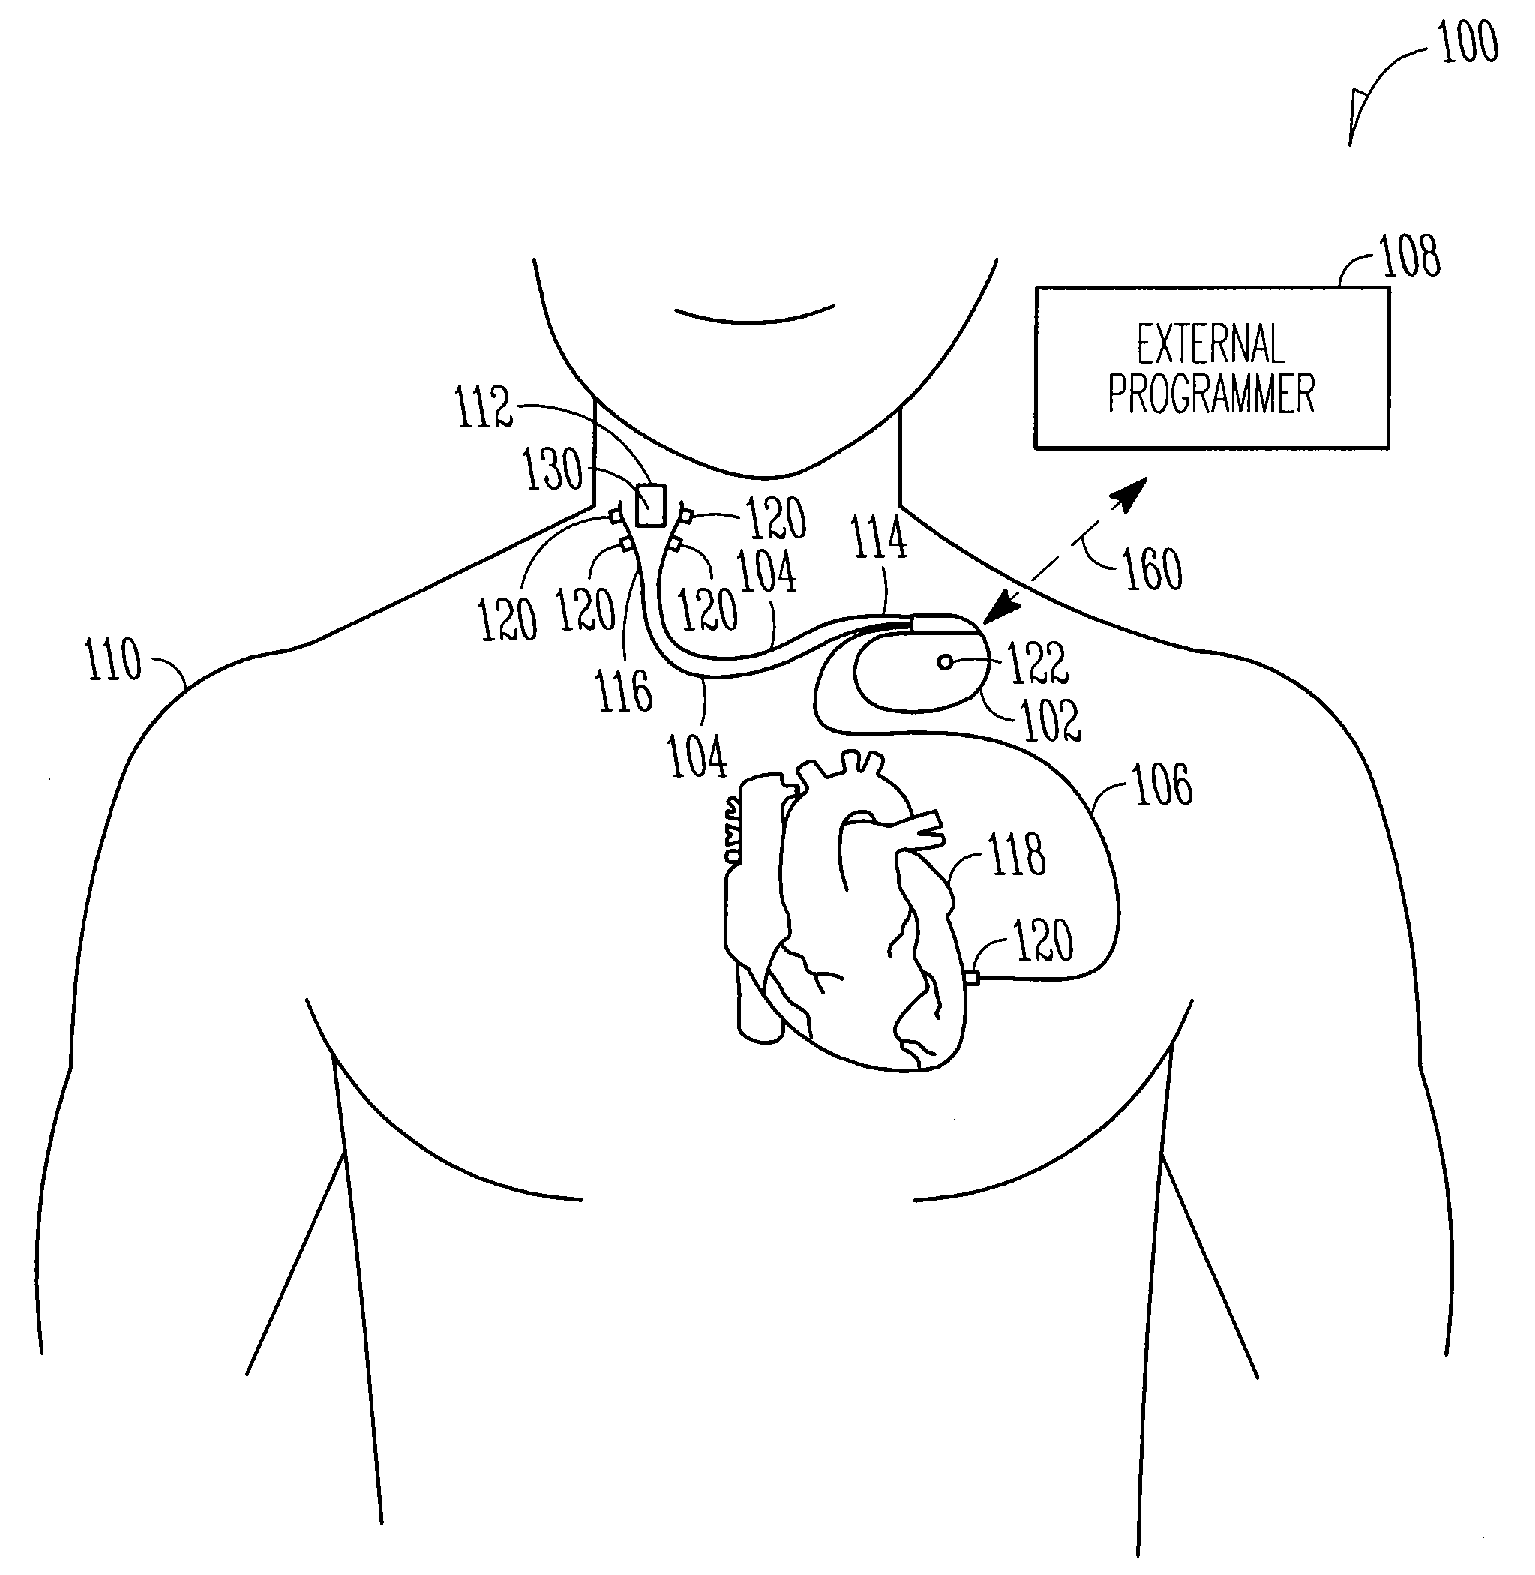 Selective nerve stimulation with optionally closed-loop capabilities